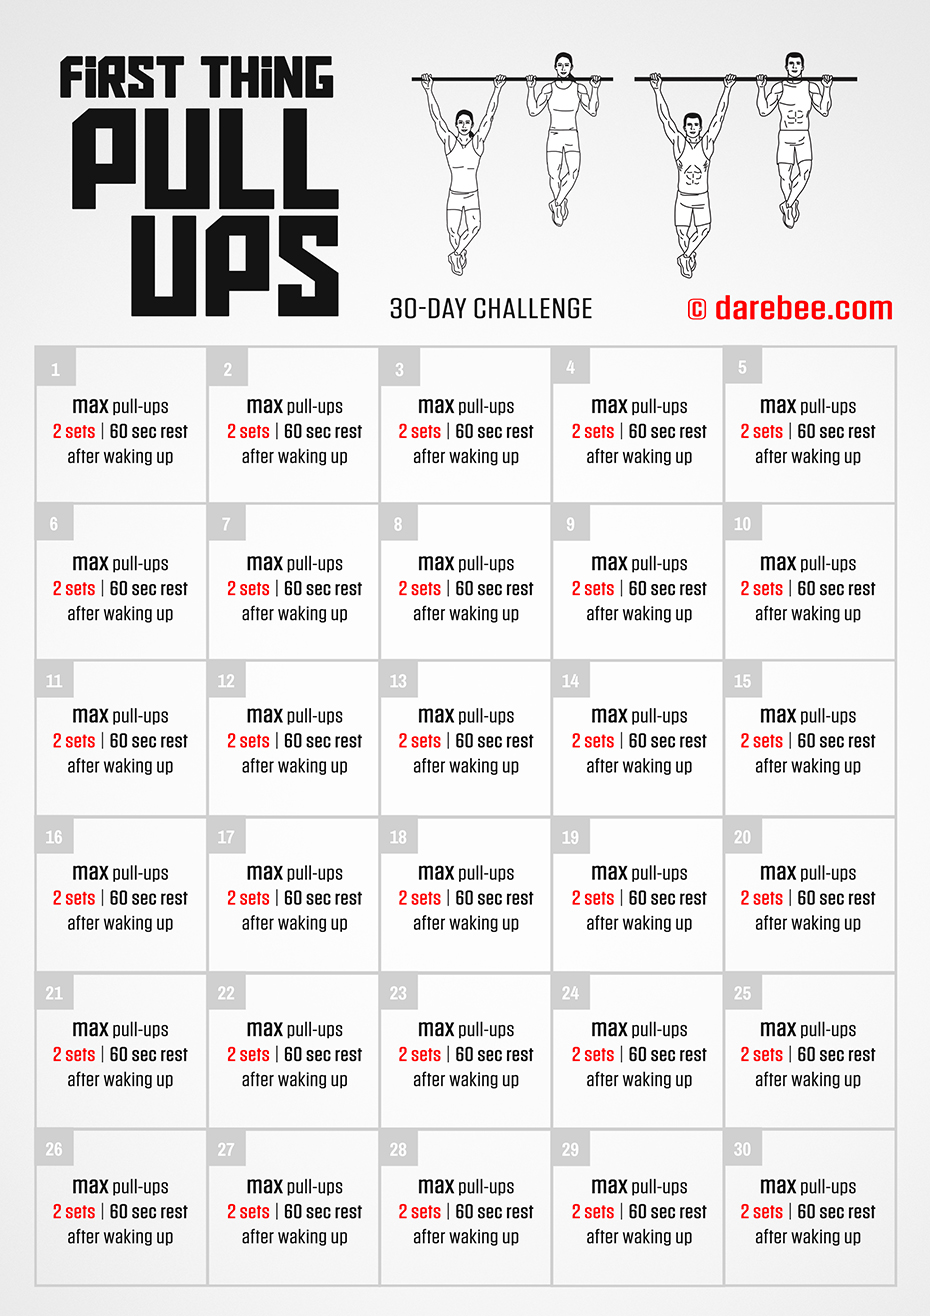 First Thing Pull-Ups Challenge is a DAREBEE month-long challenge that makes you use your own bodyweight to increase your upper body strength, mental toughness and even your cardiovascular endurance.